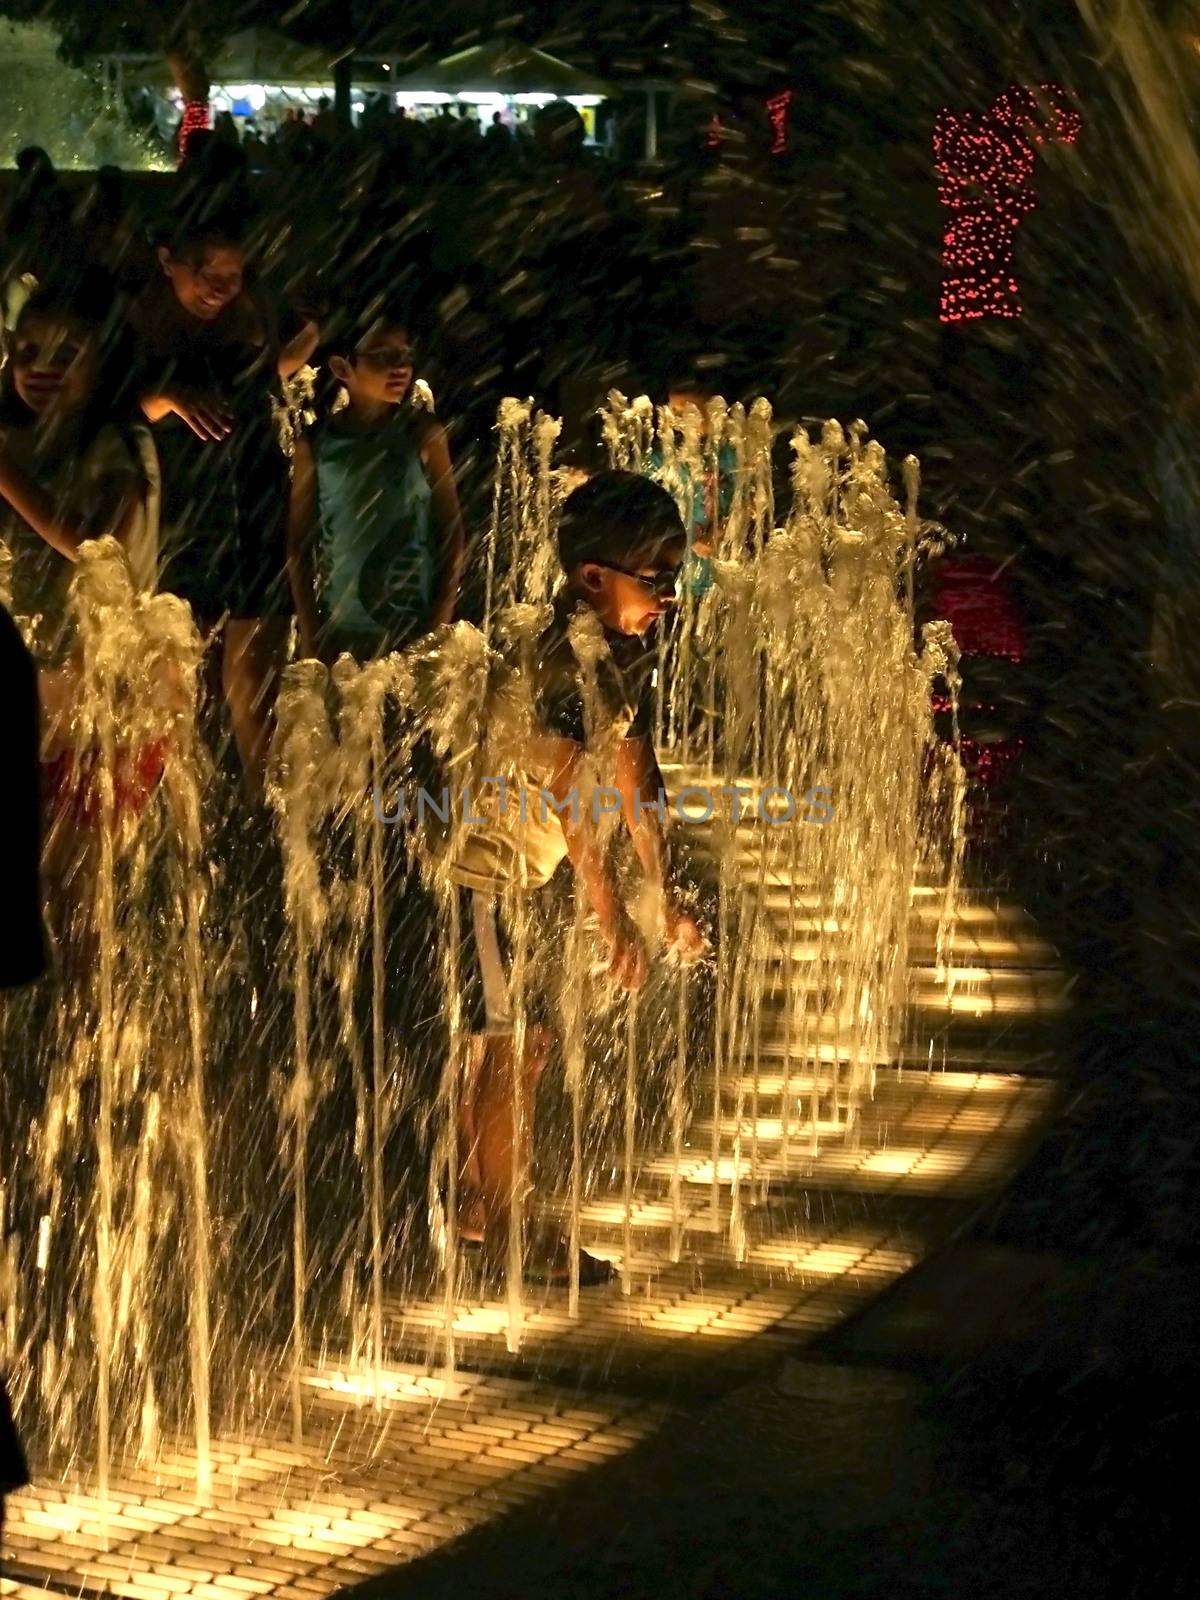 PERU, Lima: A child plays with water in a fountain as dozens of people assist to light and water show in front of the largest water wall of the world just inaugurated in the Park of the Reserve, Lima, Peru on January 15, 2016. 